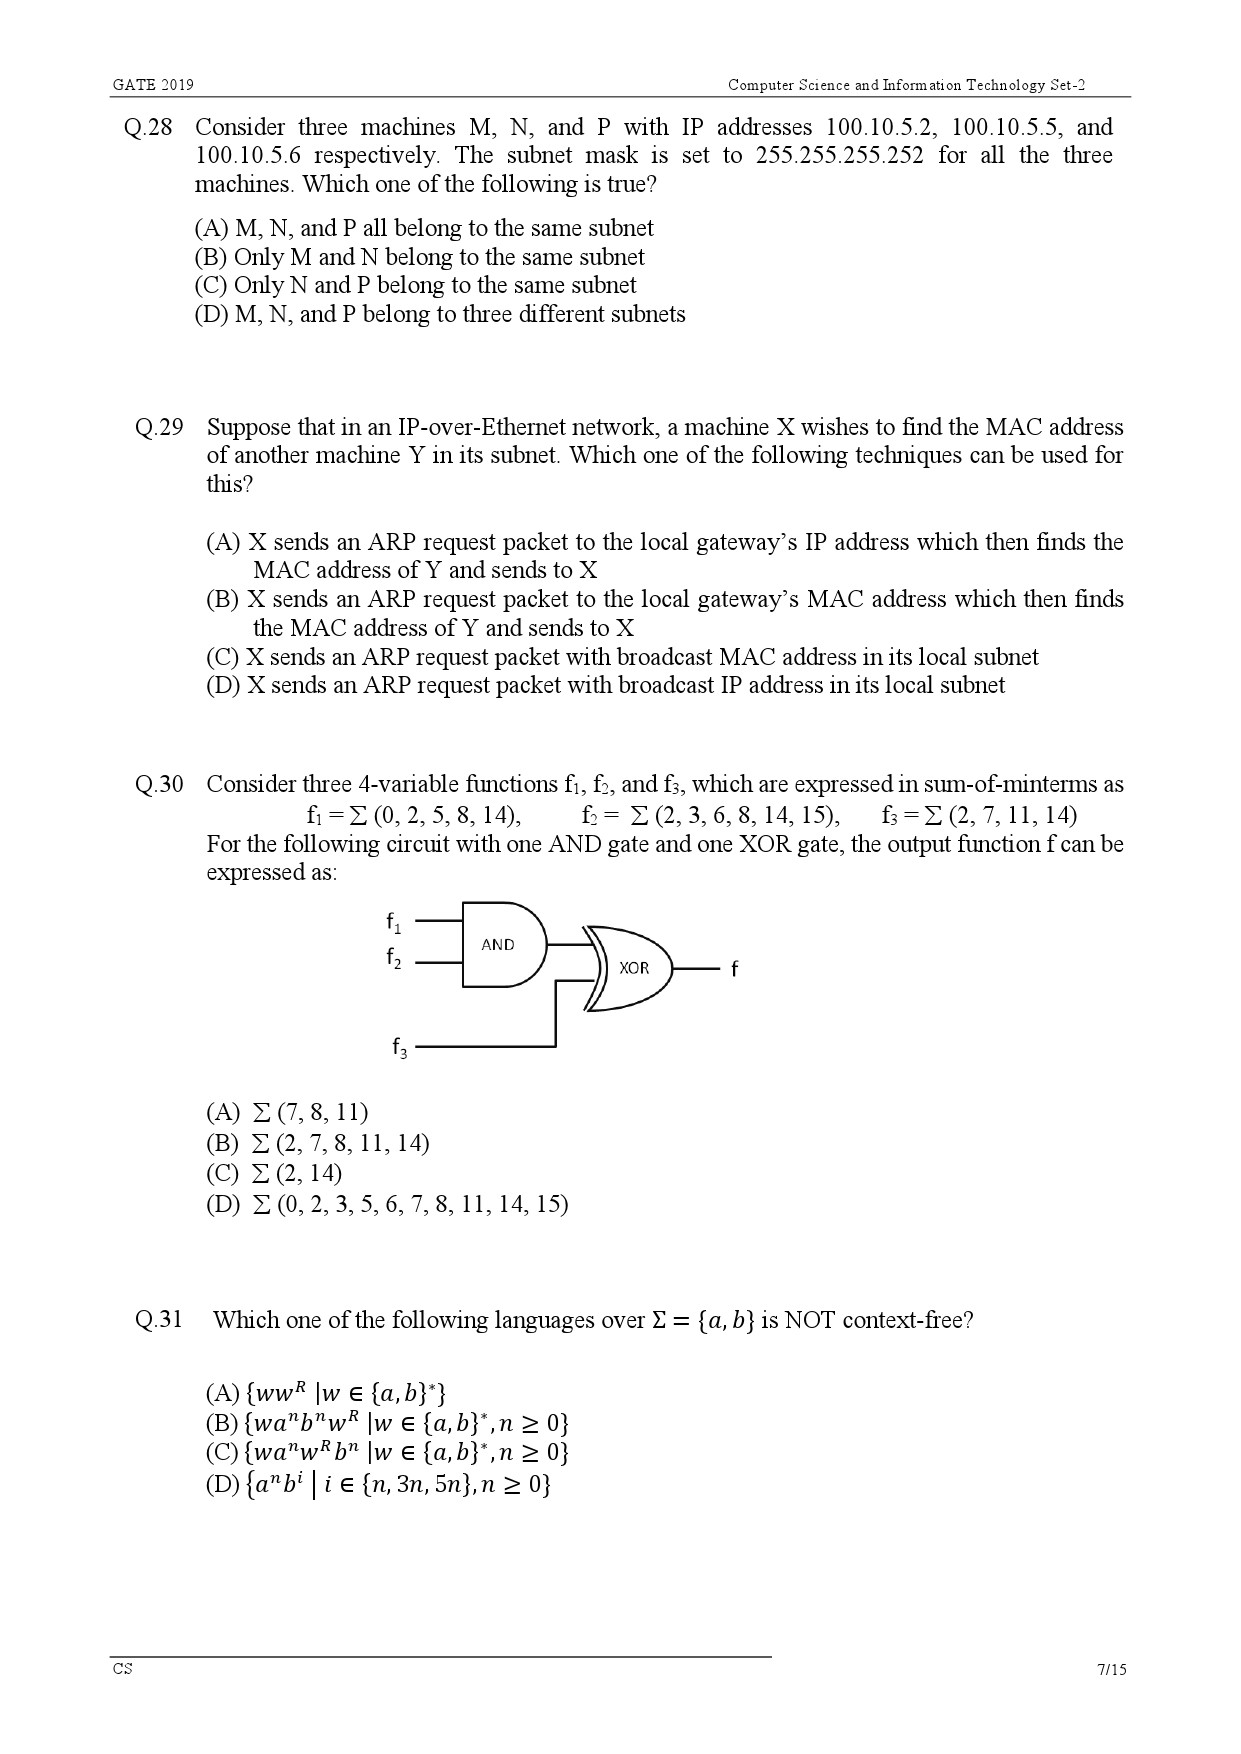 GATE Exam Question Paper 2019 Computer Science and Information Technology 10